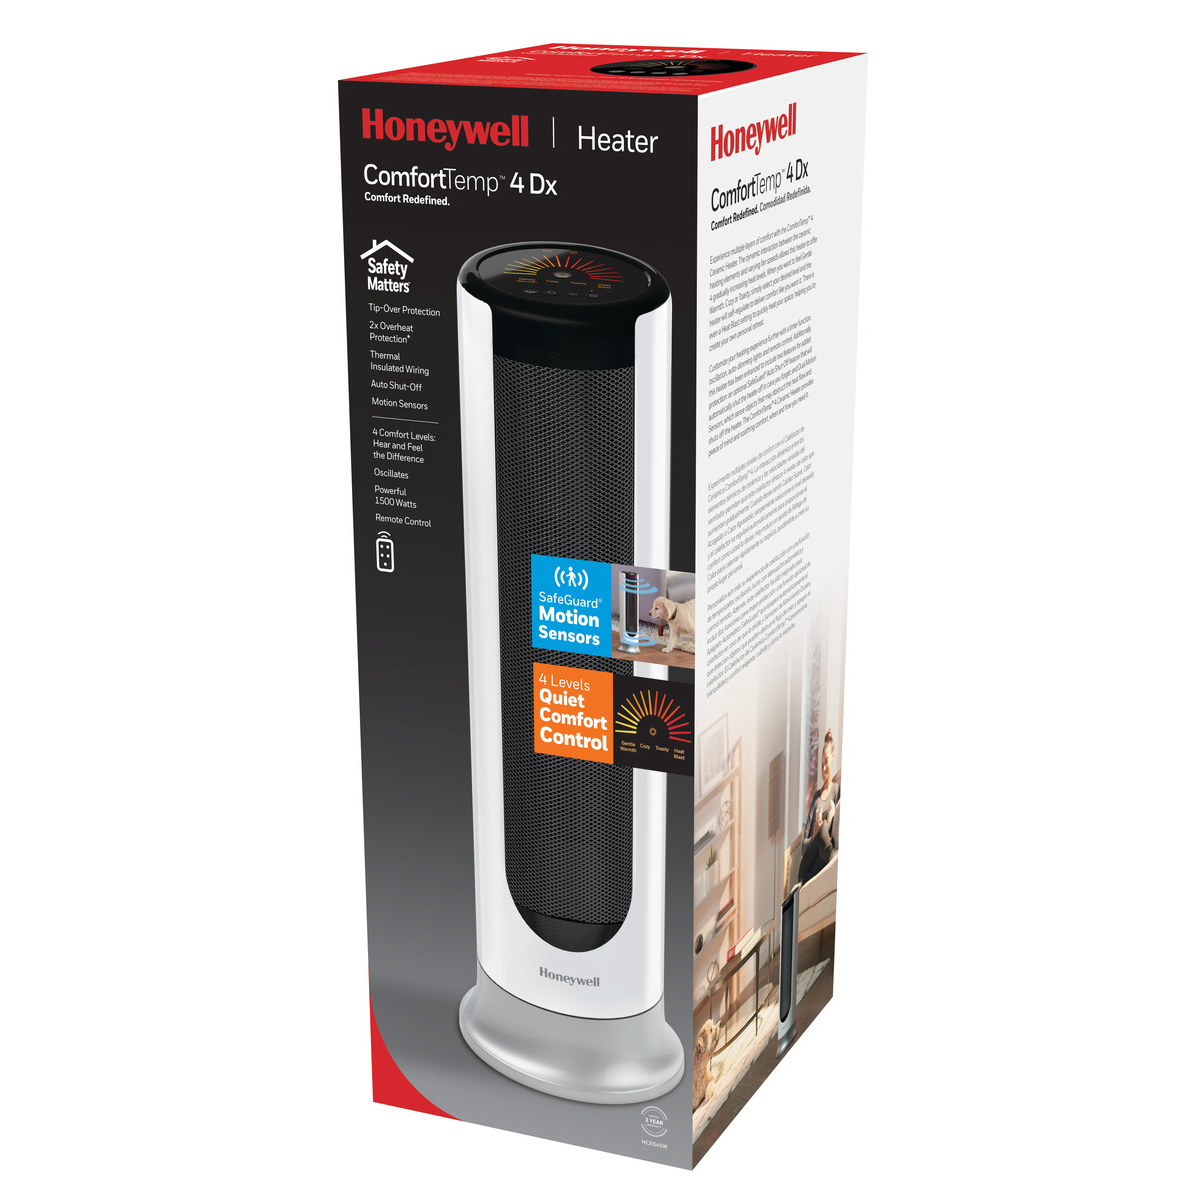 Honeywell ComfortTemp 4 Deluxe Ceramic Tower Heater, HCE645W, White - image 8 of 8